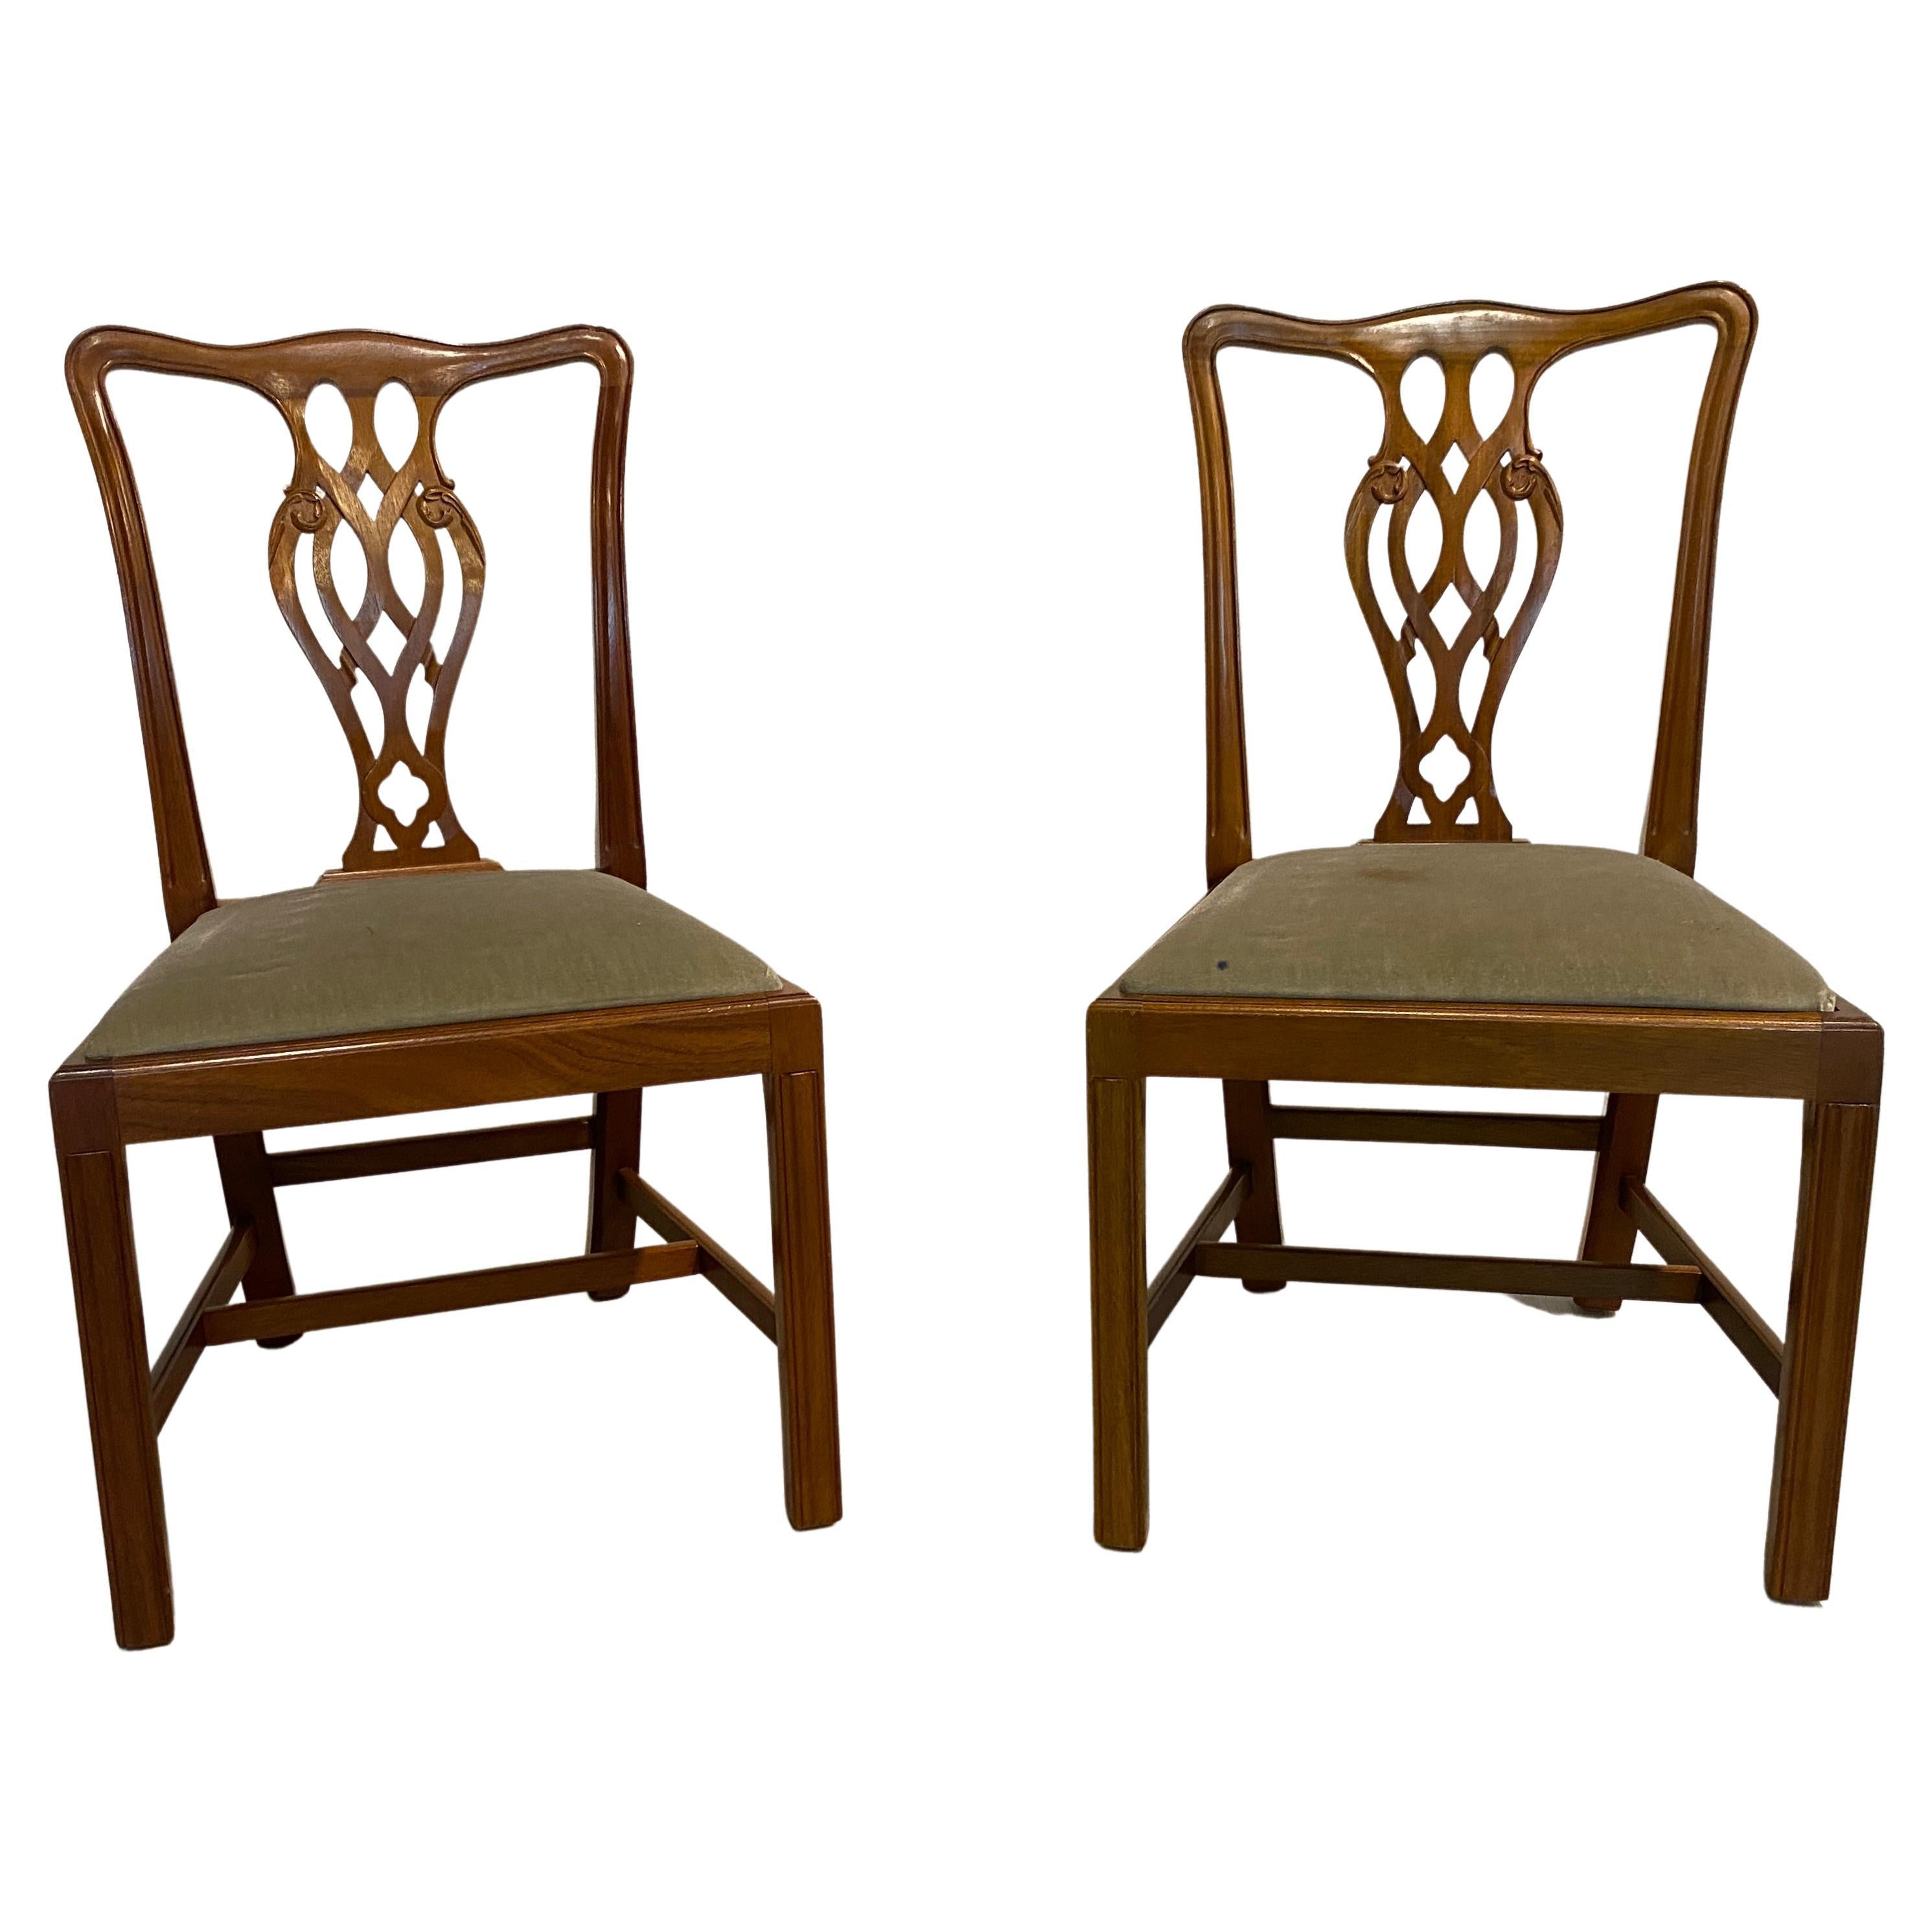 Dining Chairs, Mahogany, Georgian Style, Made in England, Two Chairs without Arm For Sale